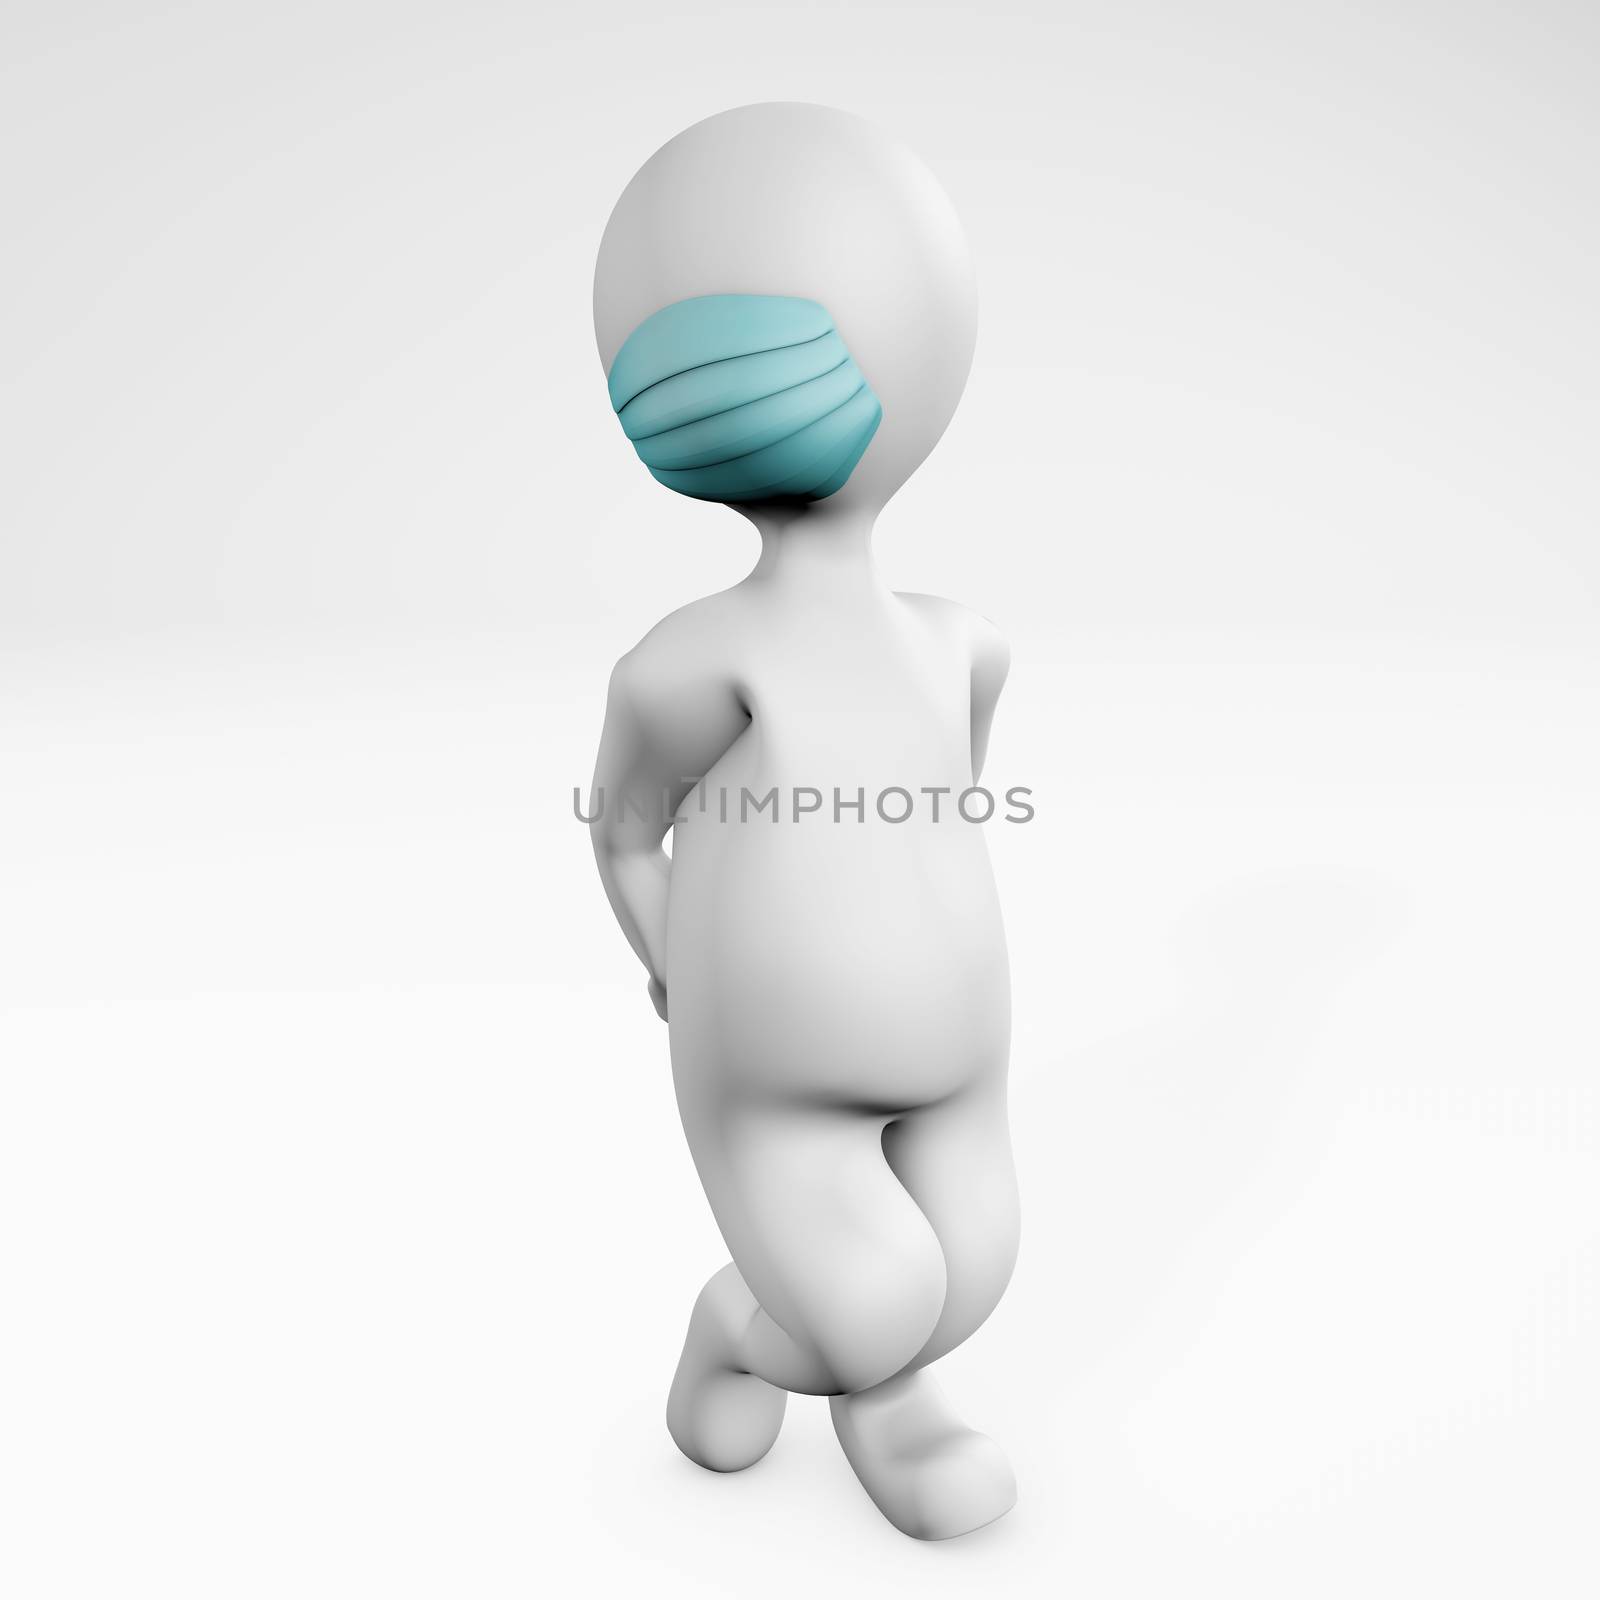 Fatty joyfull woman with a mask 3d rendering isolted on white